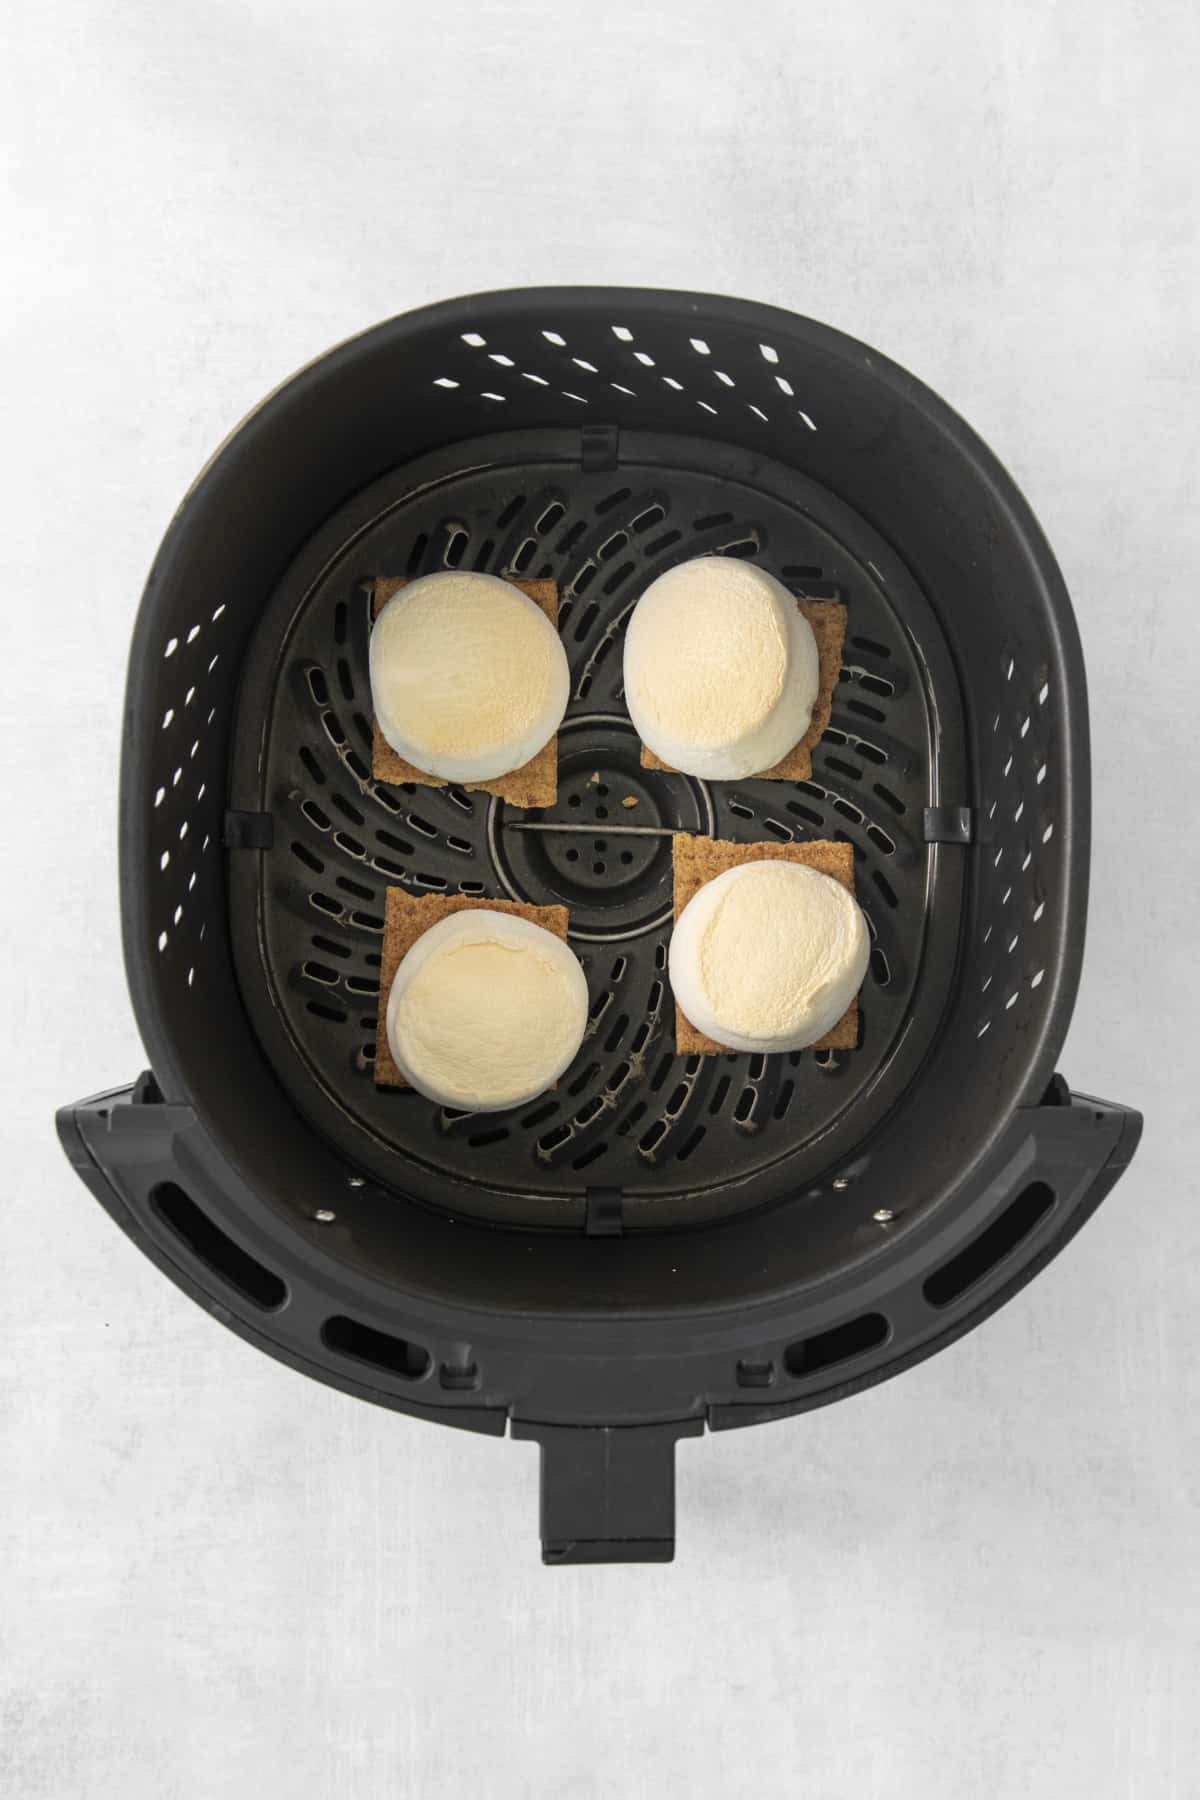 graham crackers topped with toasted marshmallows in the air fryer.